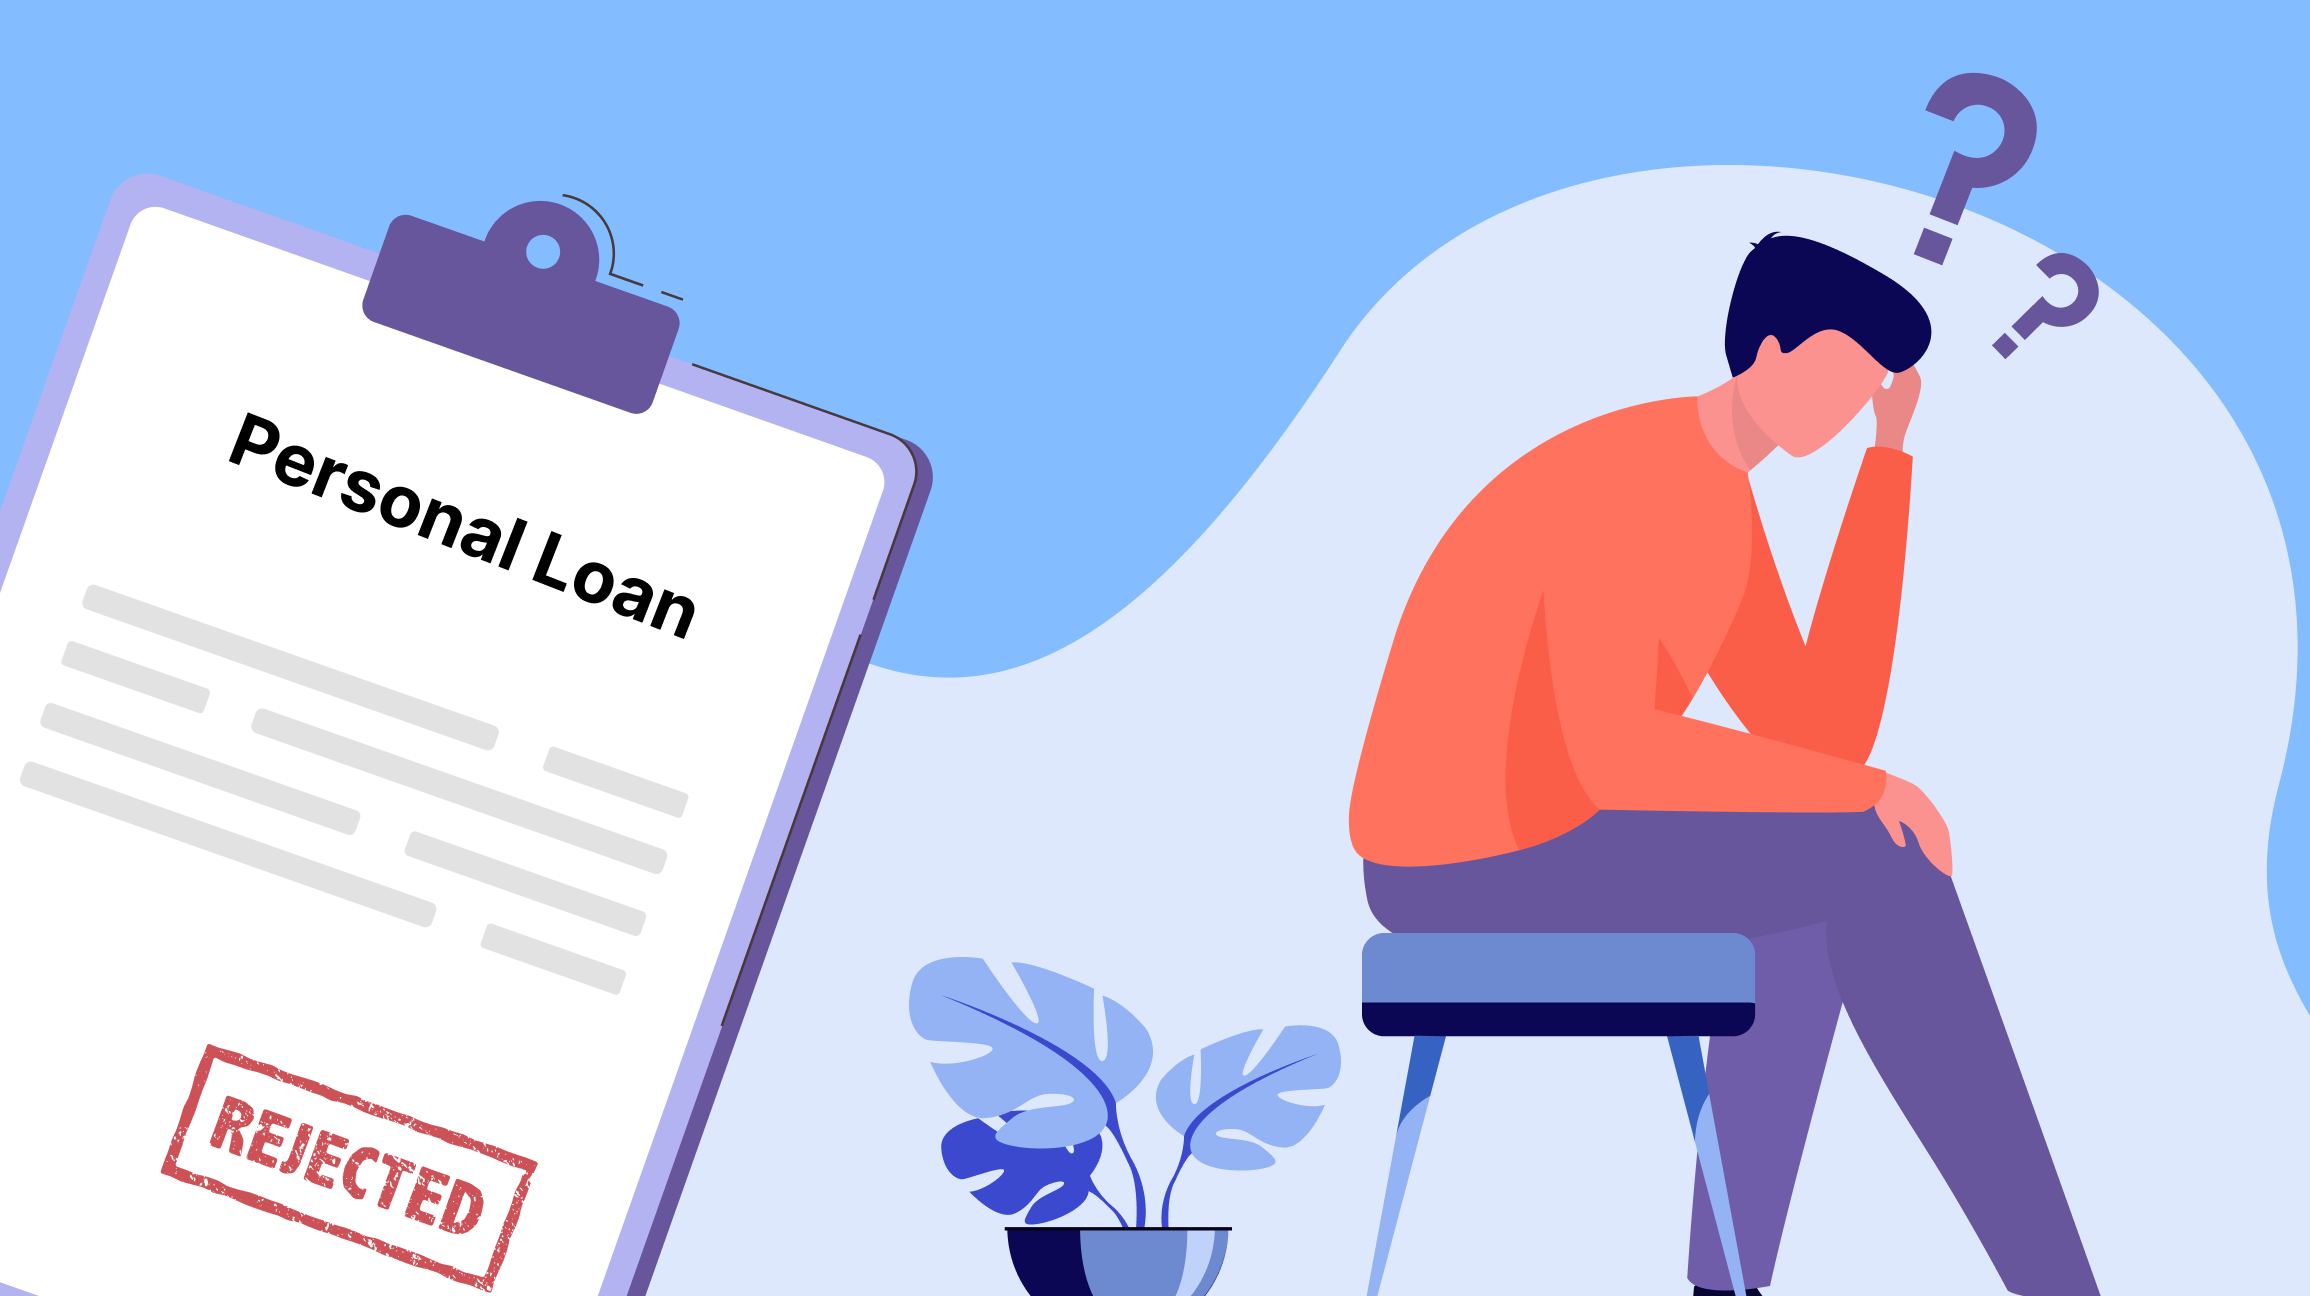 Why Would a Personal Loan Be Declined